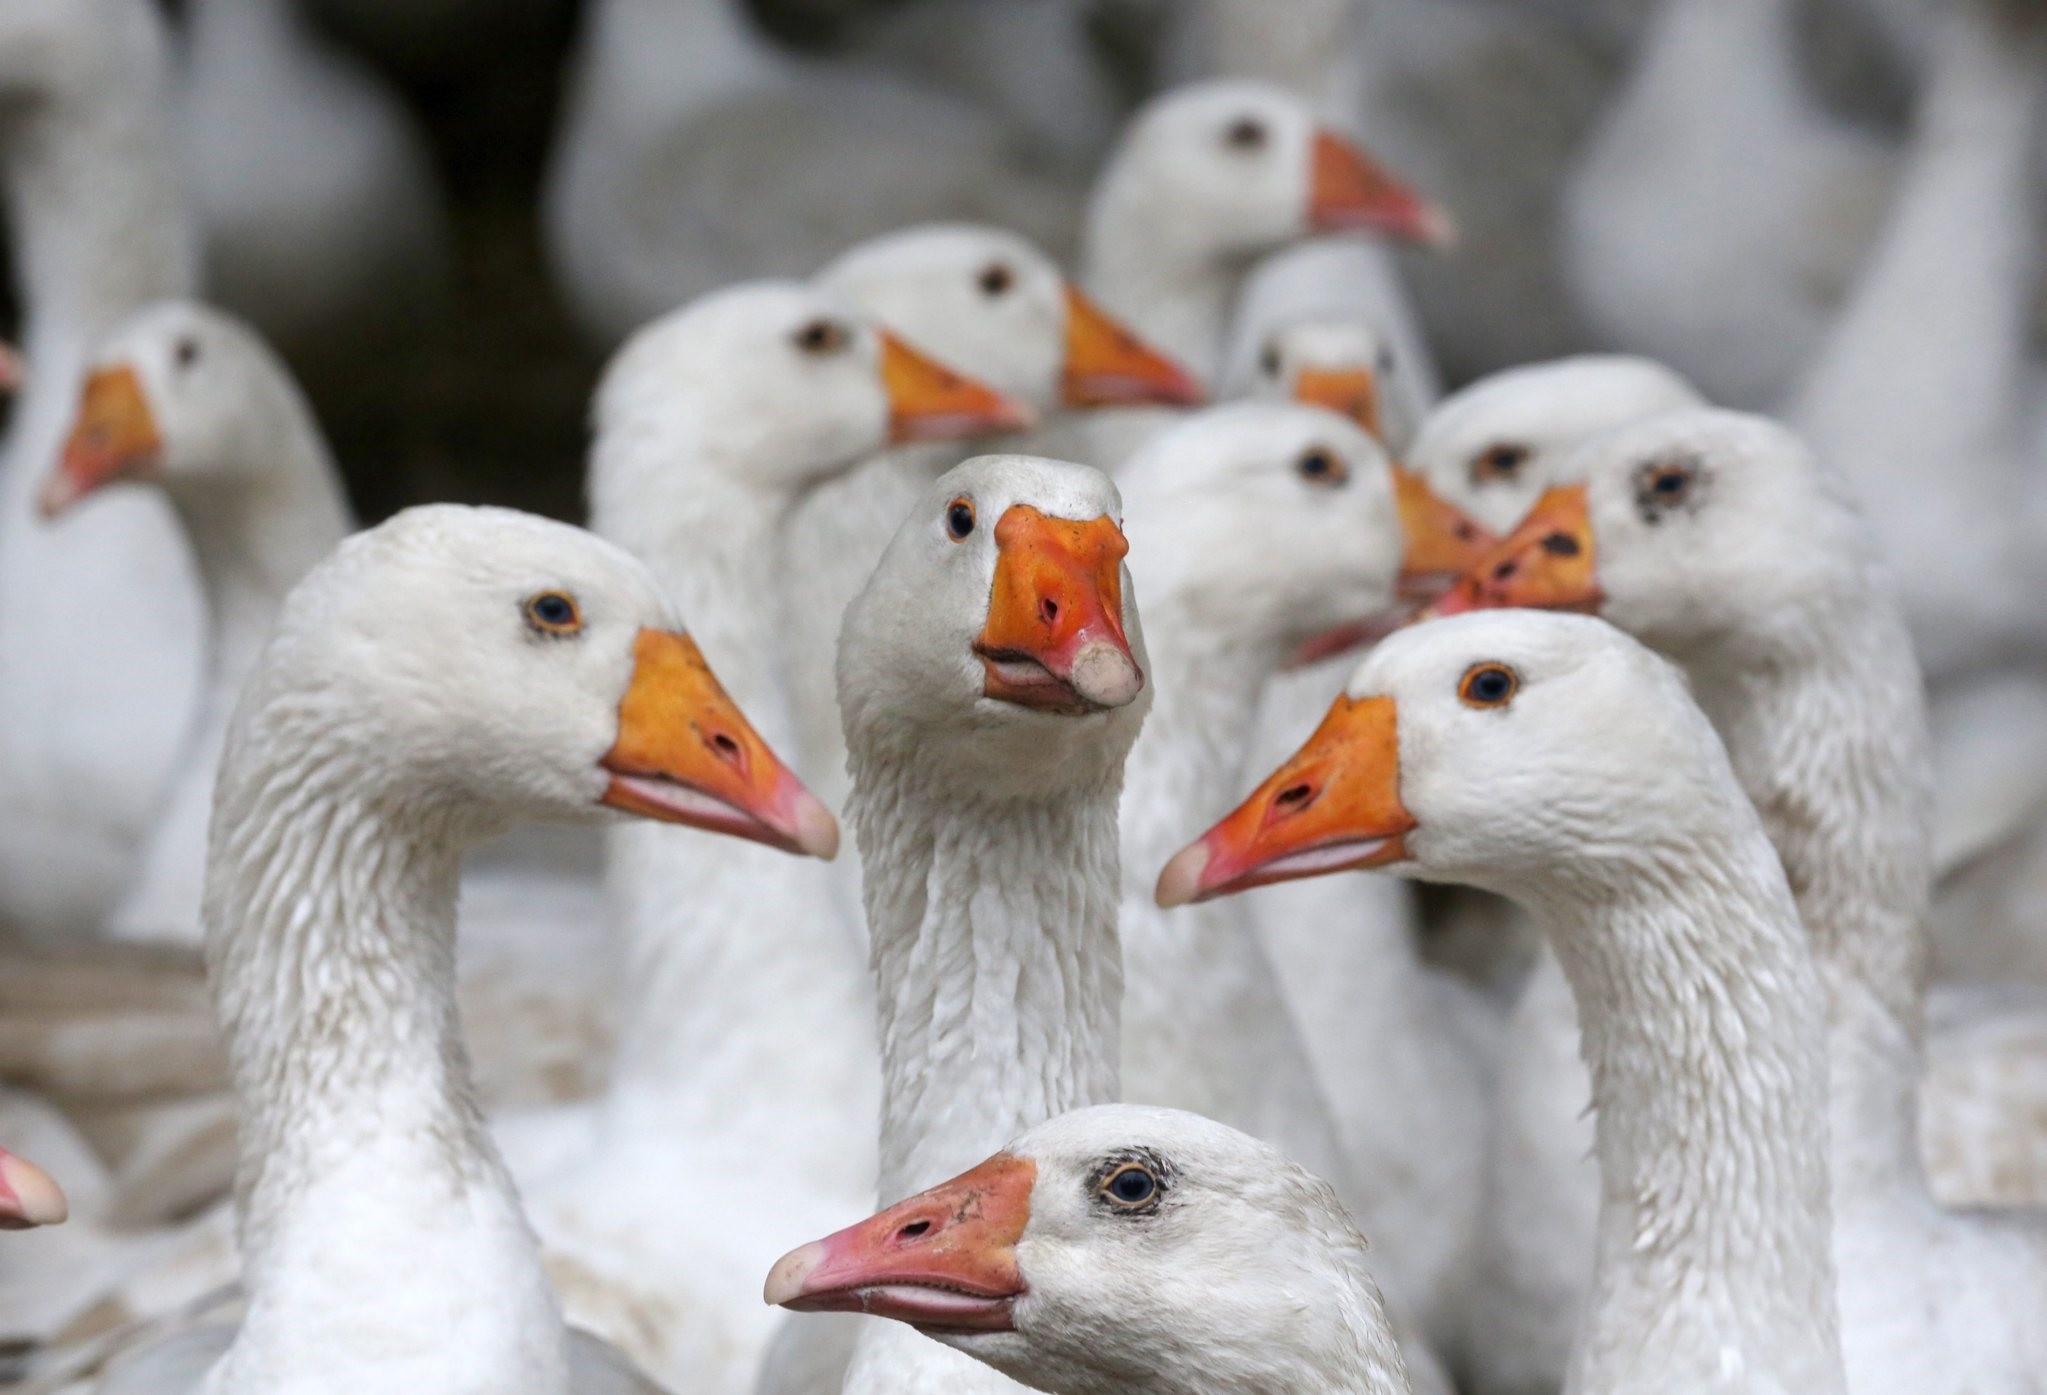 Geese are kept in stalls after farmers were ordered to keep the animals inside in the wake of an outbreak of avian flu in North Rhine-Westphalia. (EPA Photo)